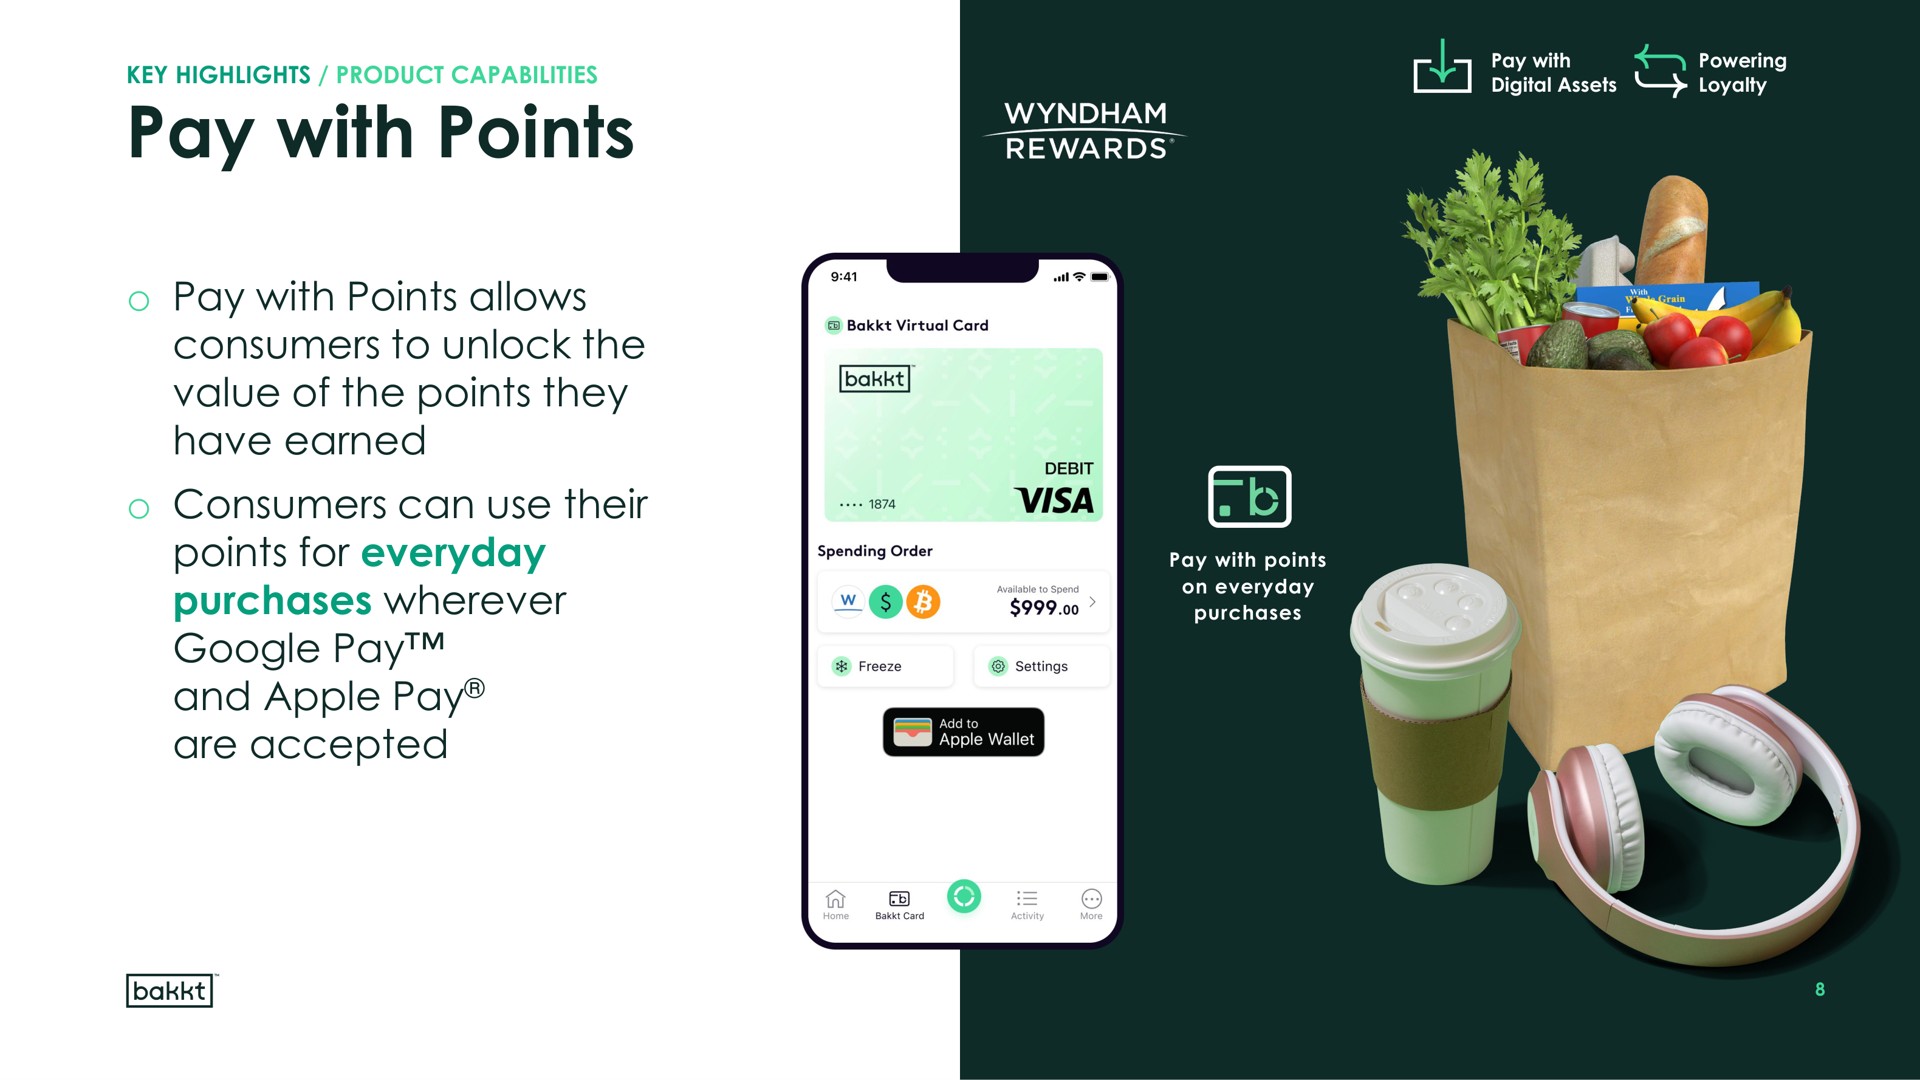 pay with points pay with points allows consumers to unlock the value of the points they have earned consumers can use their points for everyday purchases wherever pay and apple pay are accepted ace | Bakkt